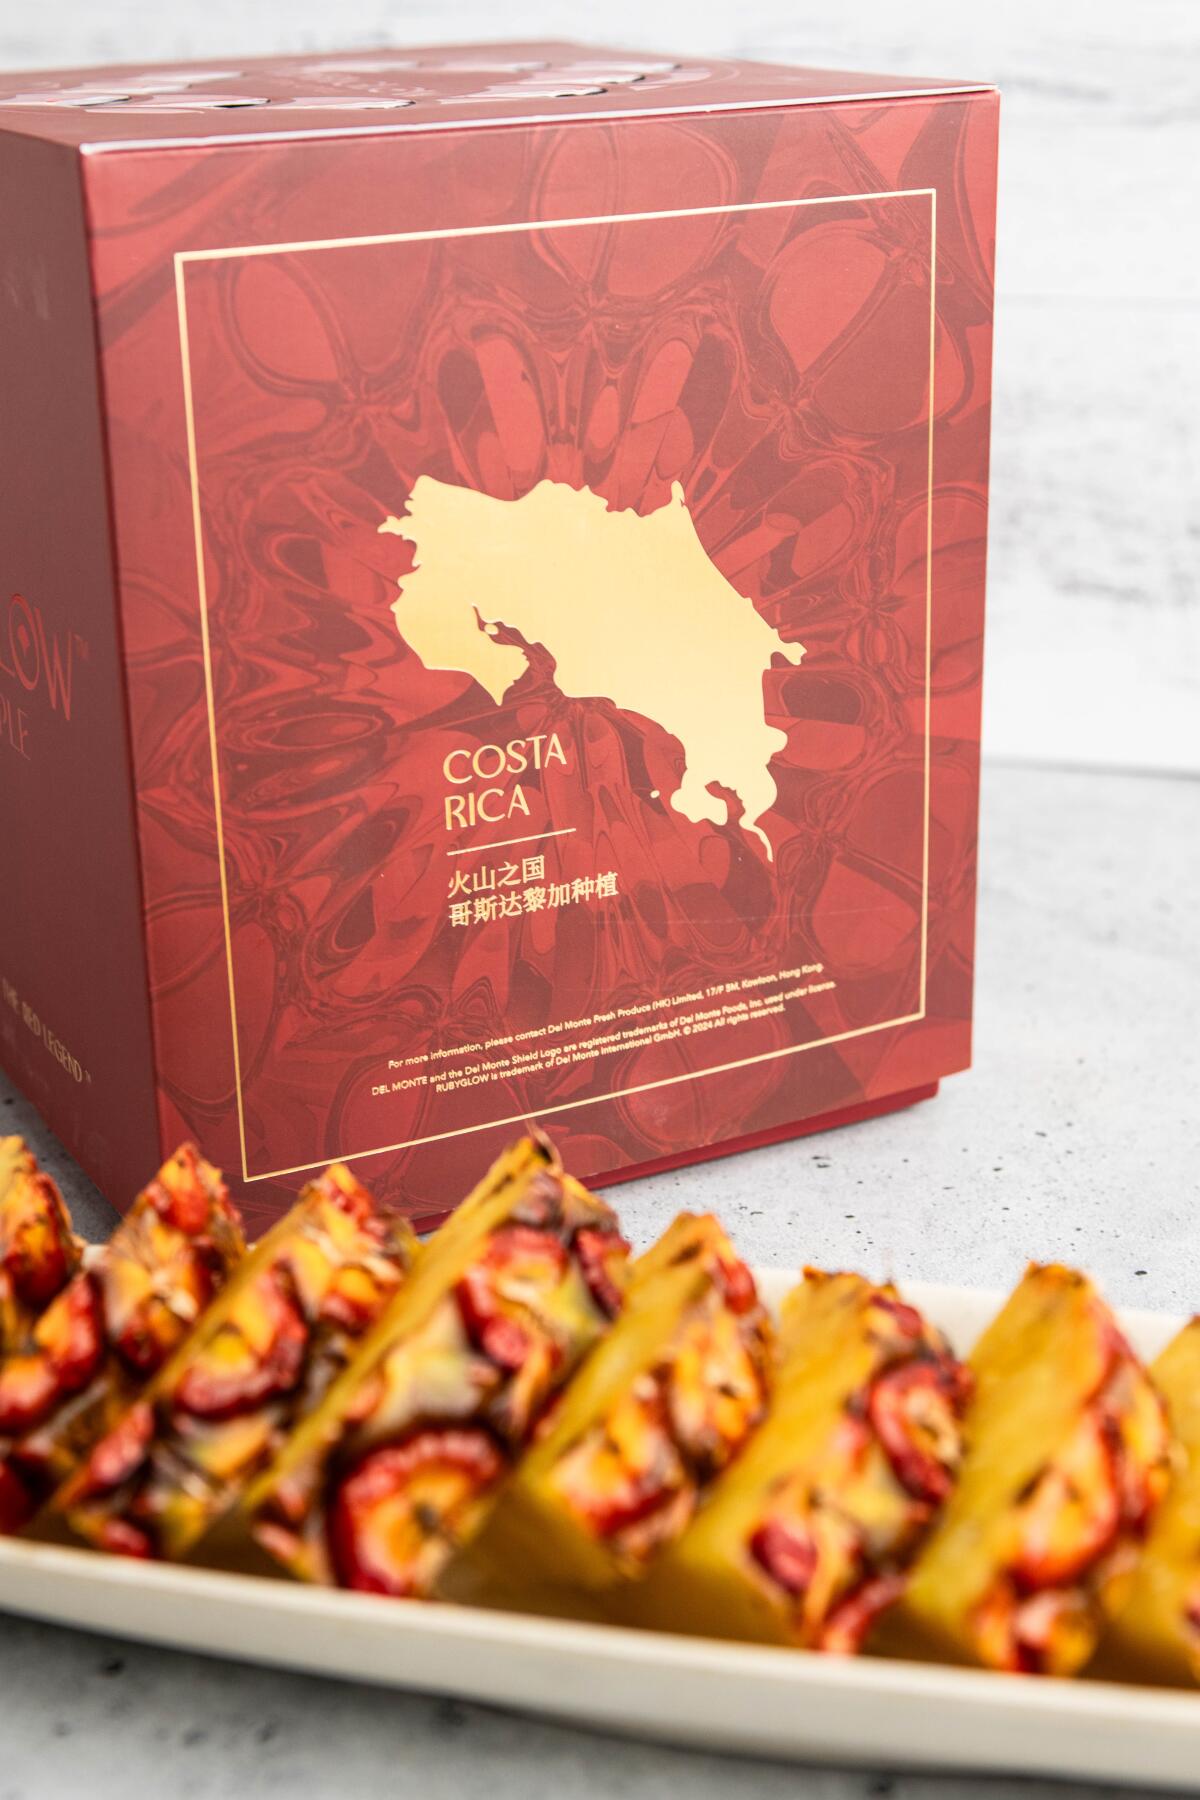 Slices of Ruby Glow pineapple in front of its red and gold packaging.